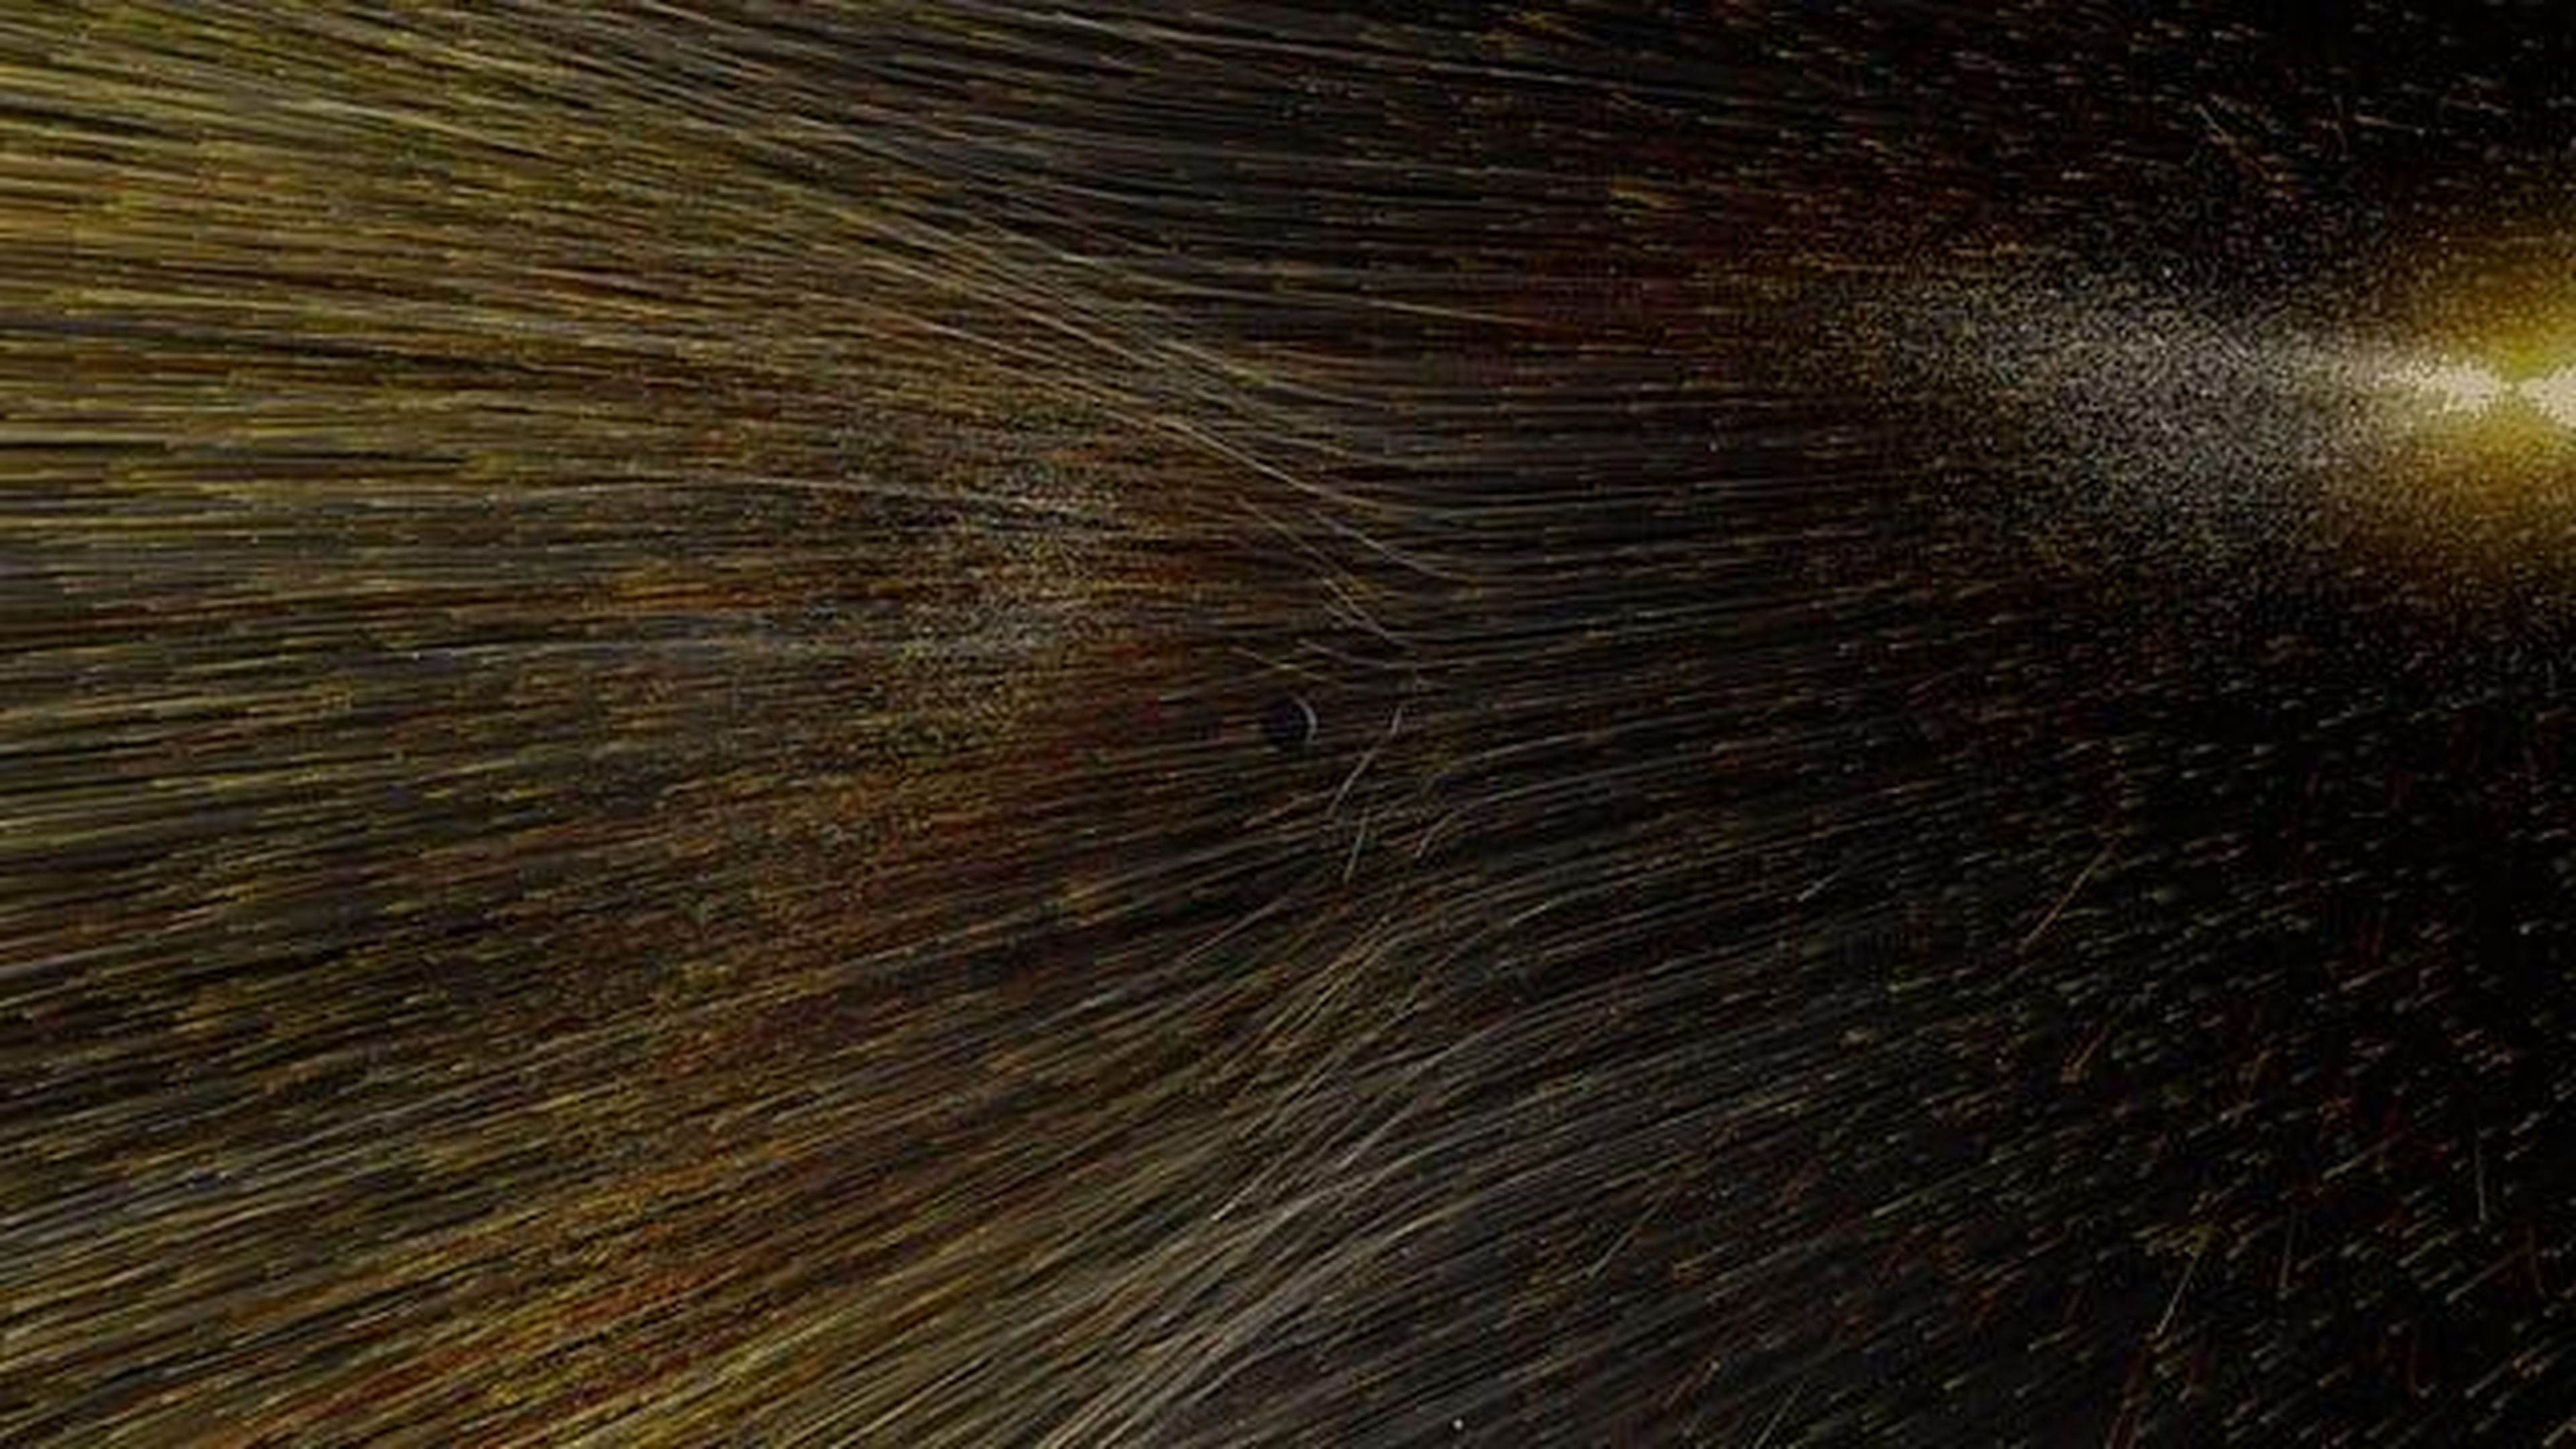 An animation of the solar wind shows particles streaming from the sun towards Earth. NASA